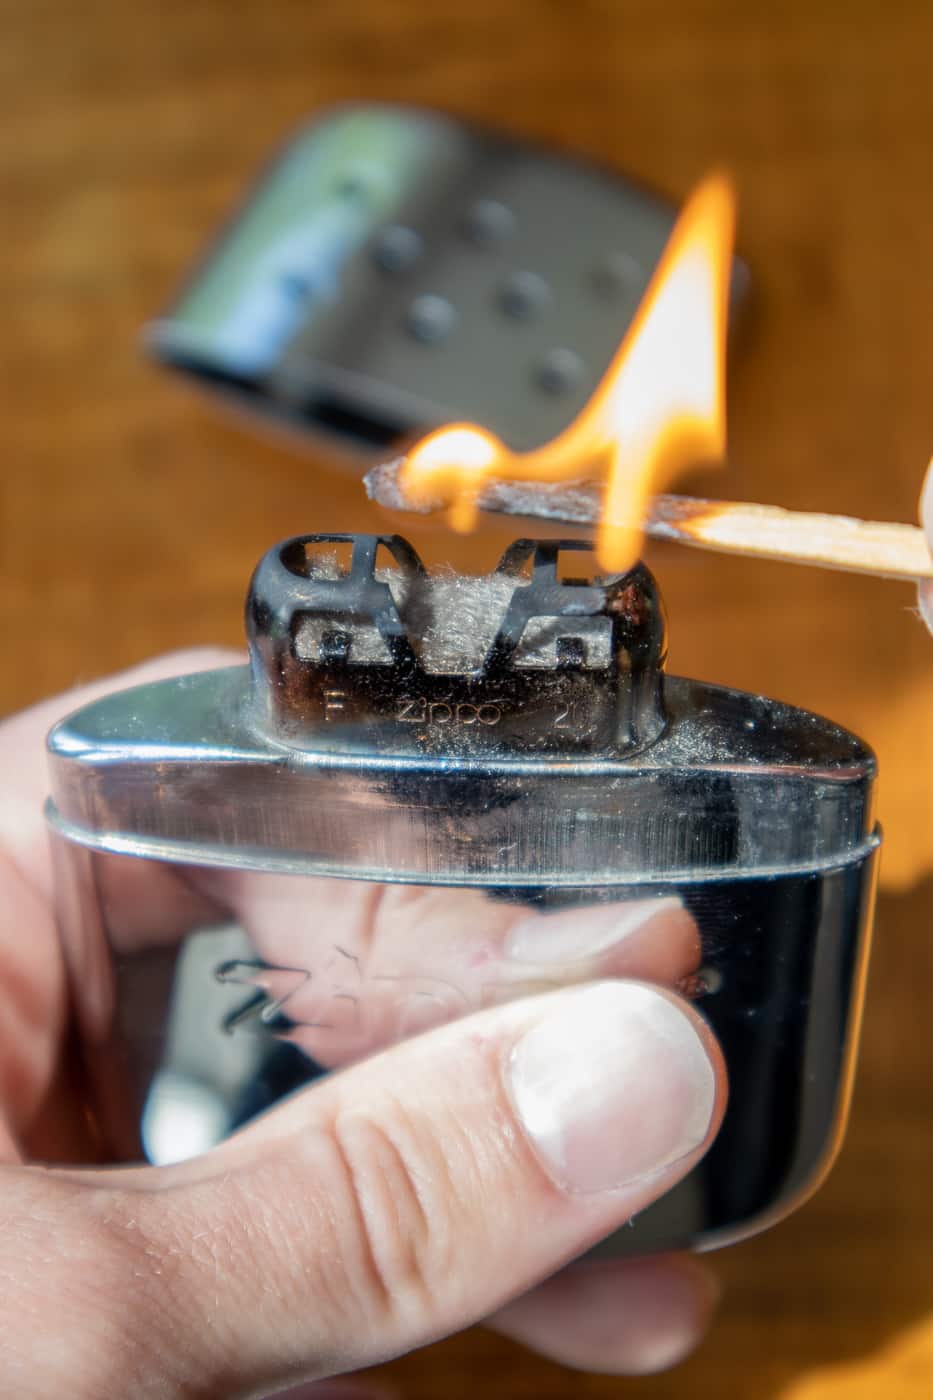 Zippo Refillable Hand Warmer Review: Old School Cool - The Modest Man